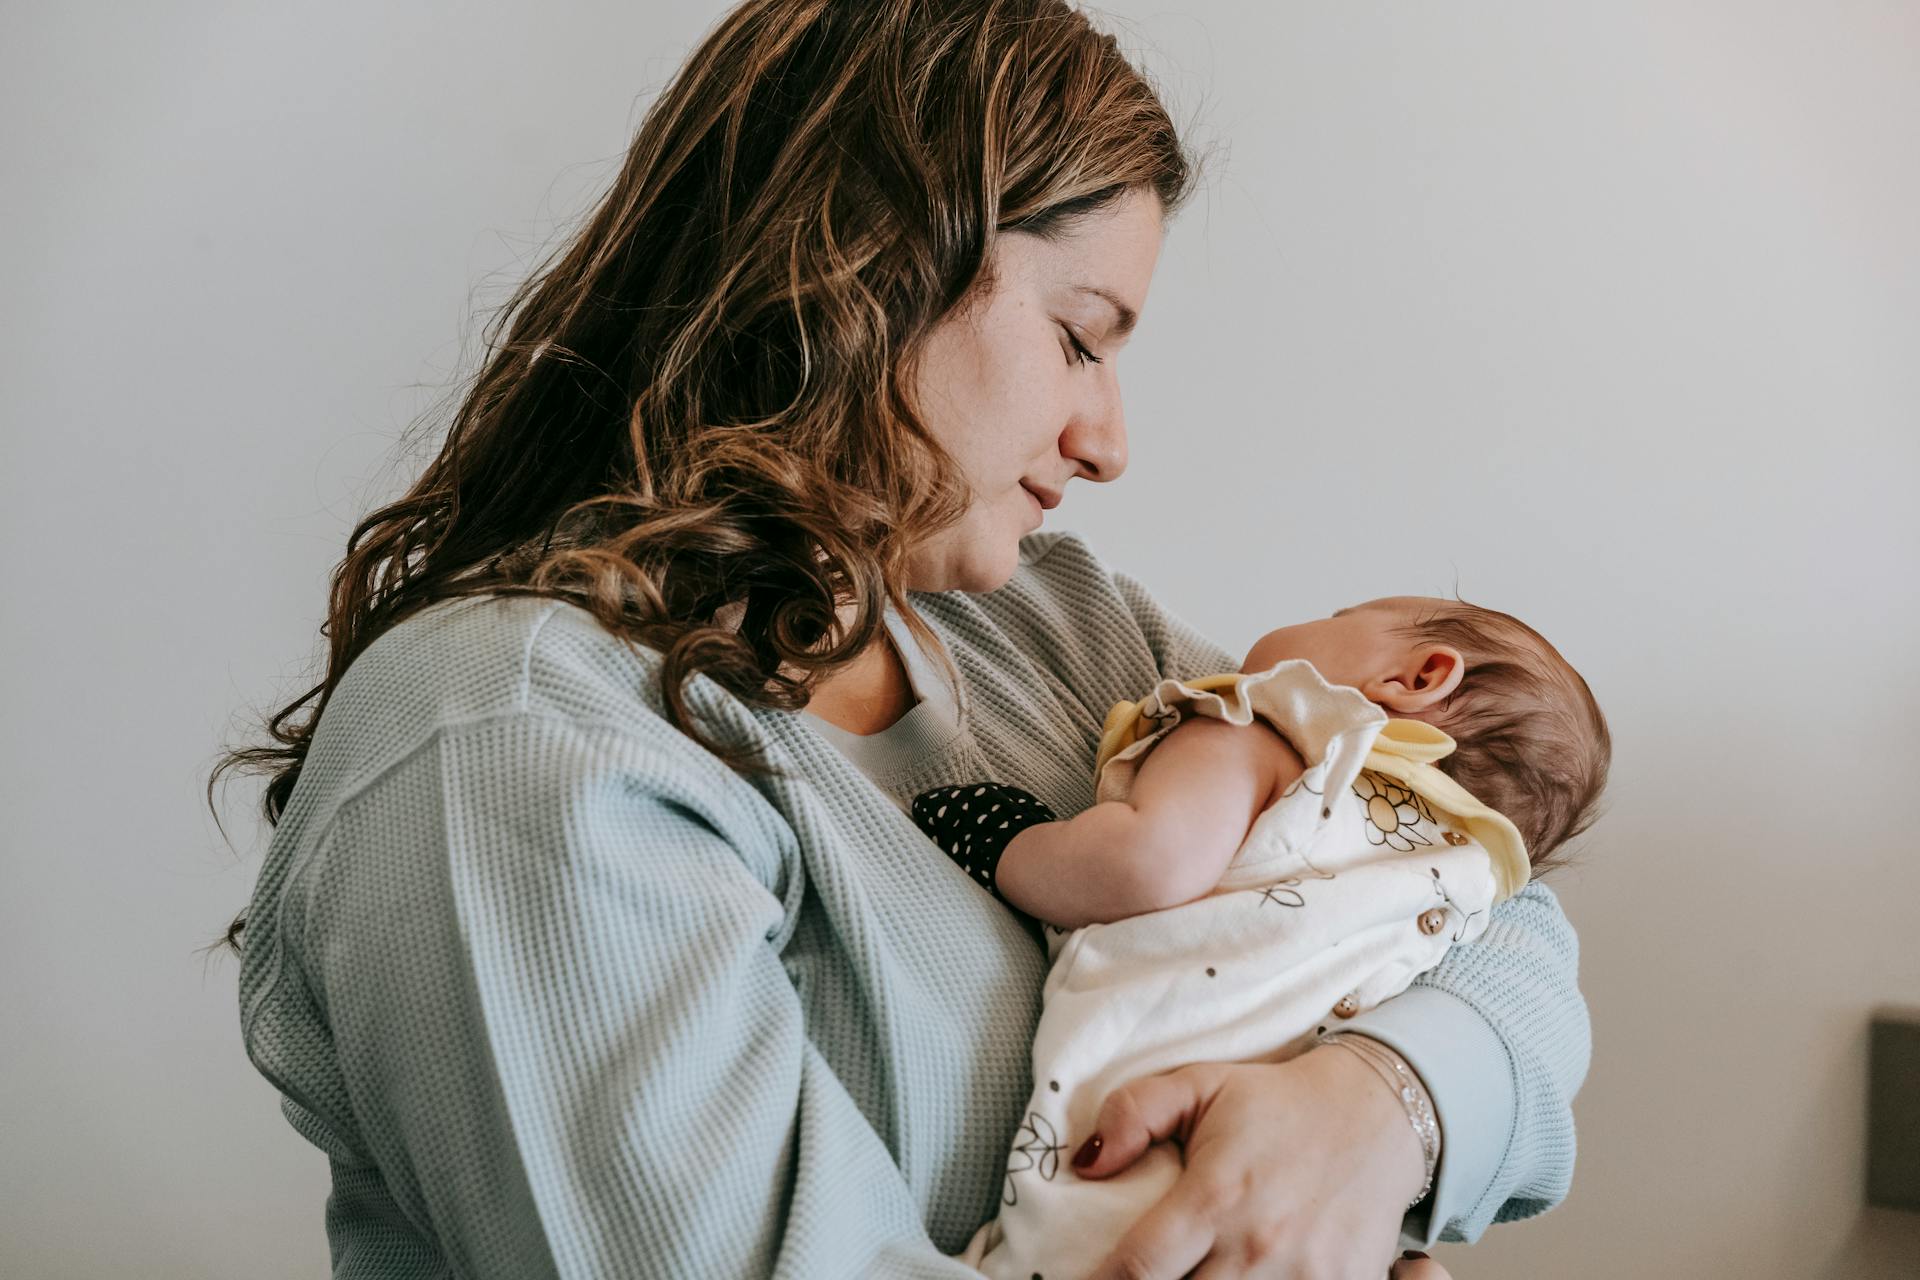 Happy and peaceful mother cuddling with her child | Source: Pexels